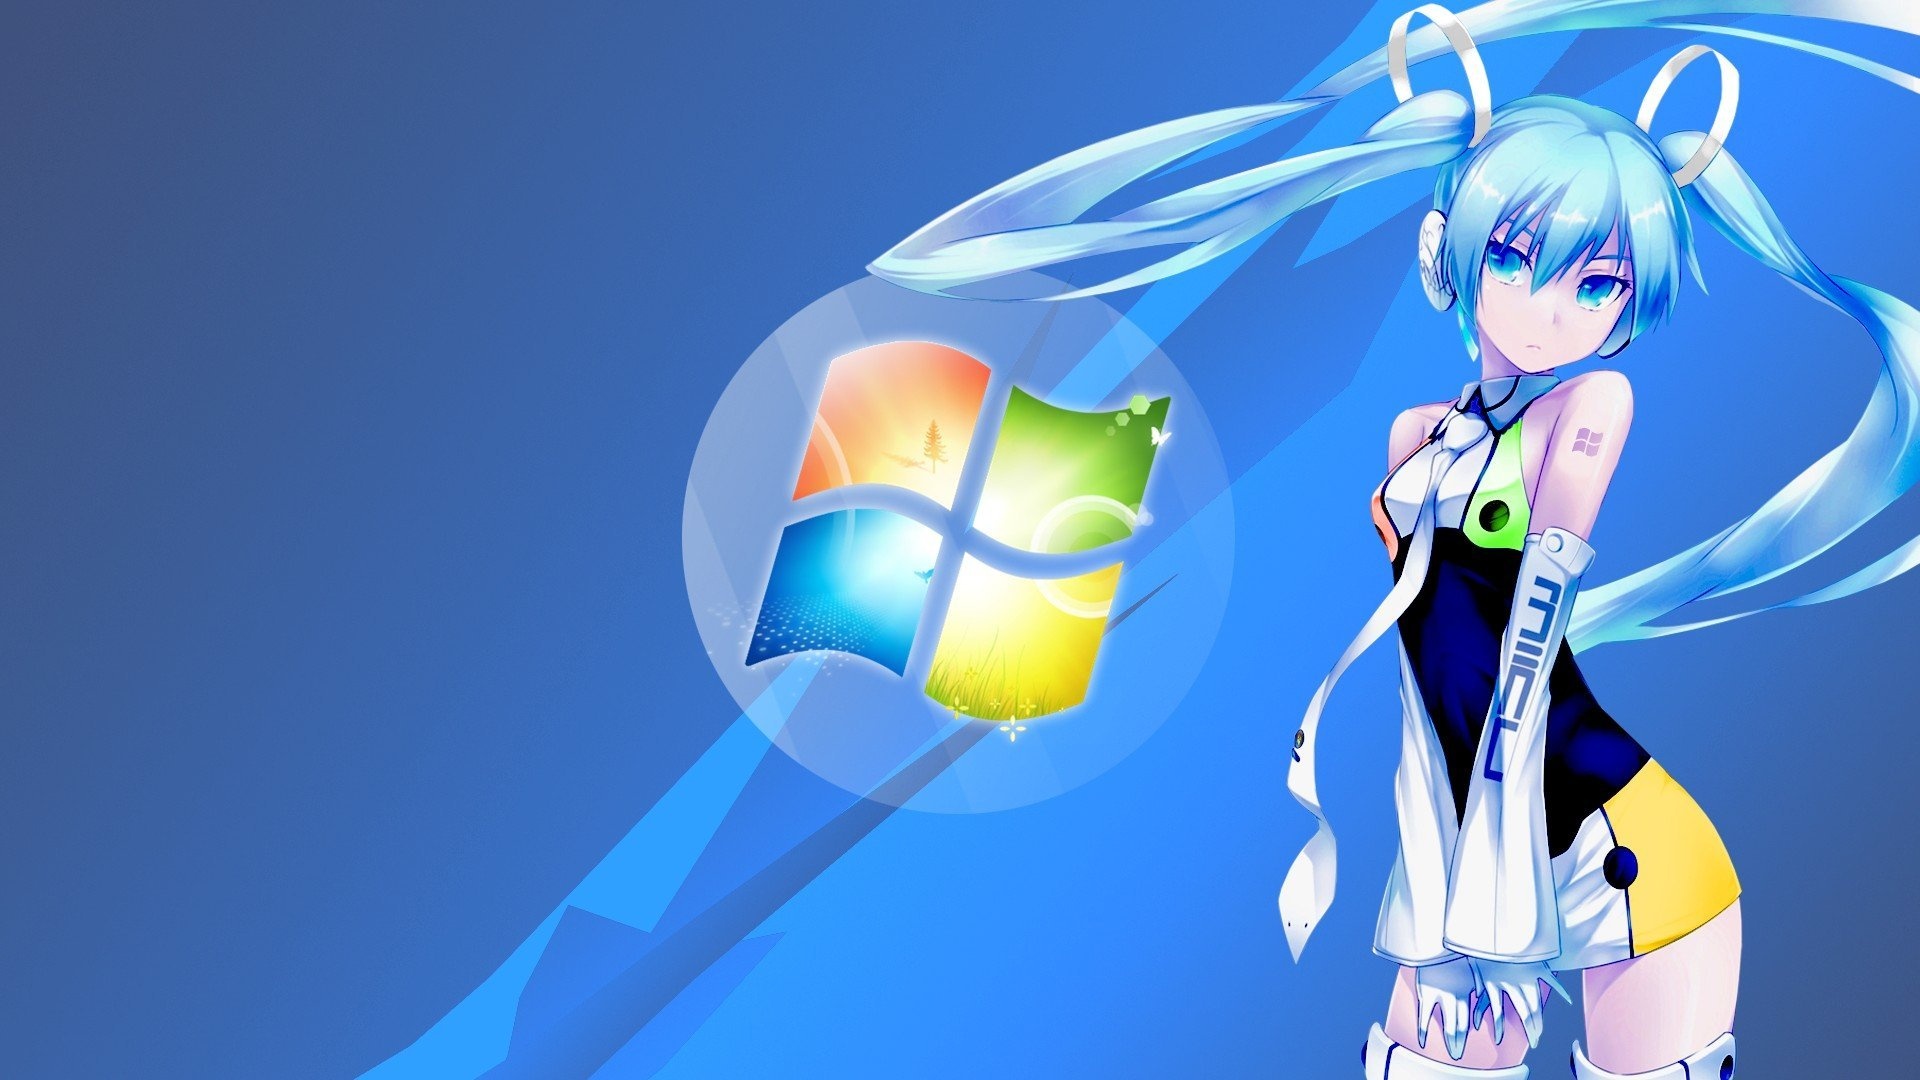 Anime Girls For Windows computer background